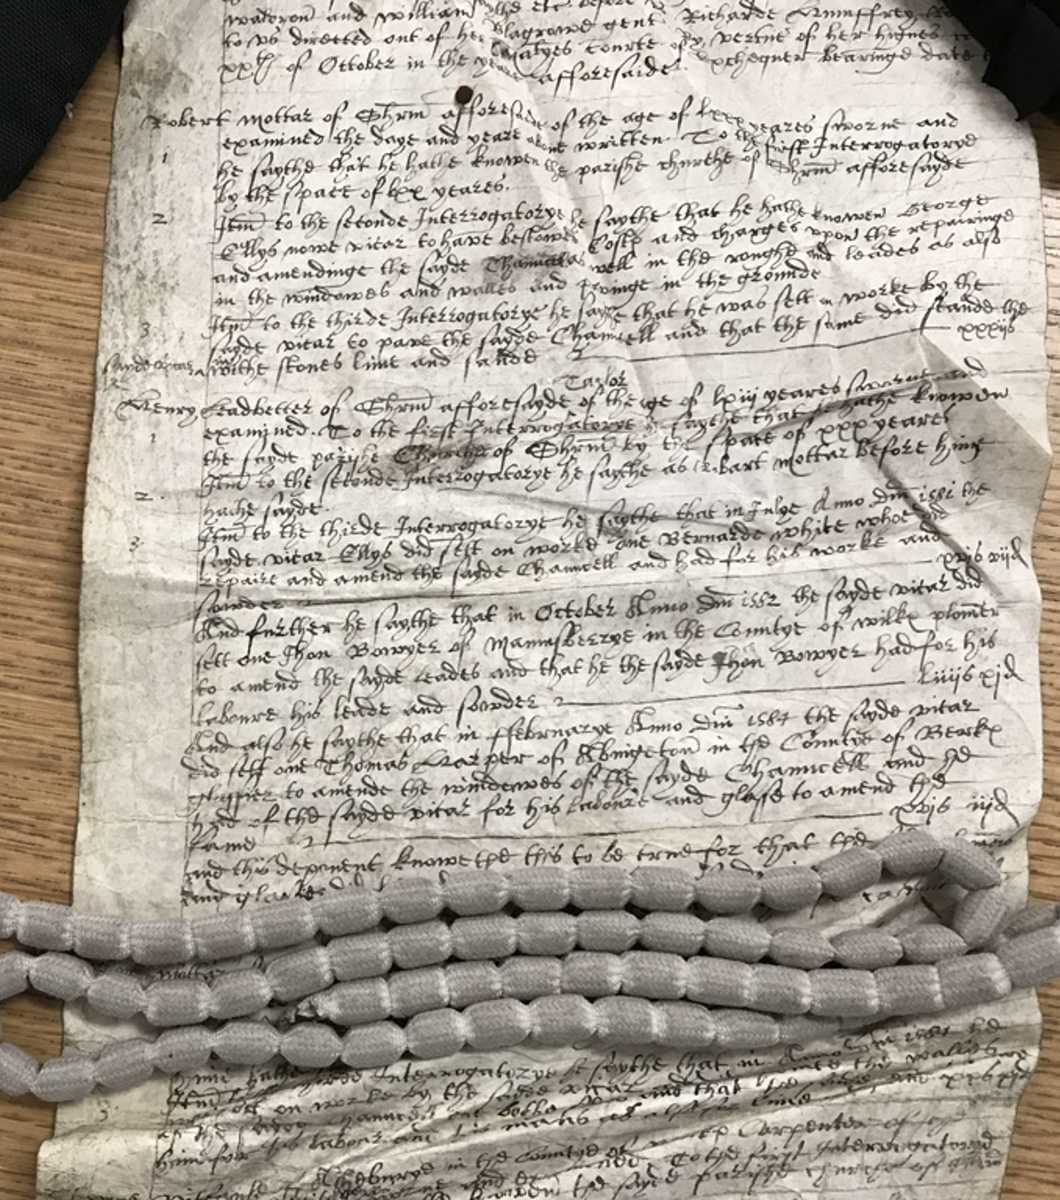 The top half of the original document courtesy of the National Archives at Kew